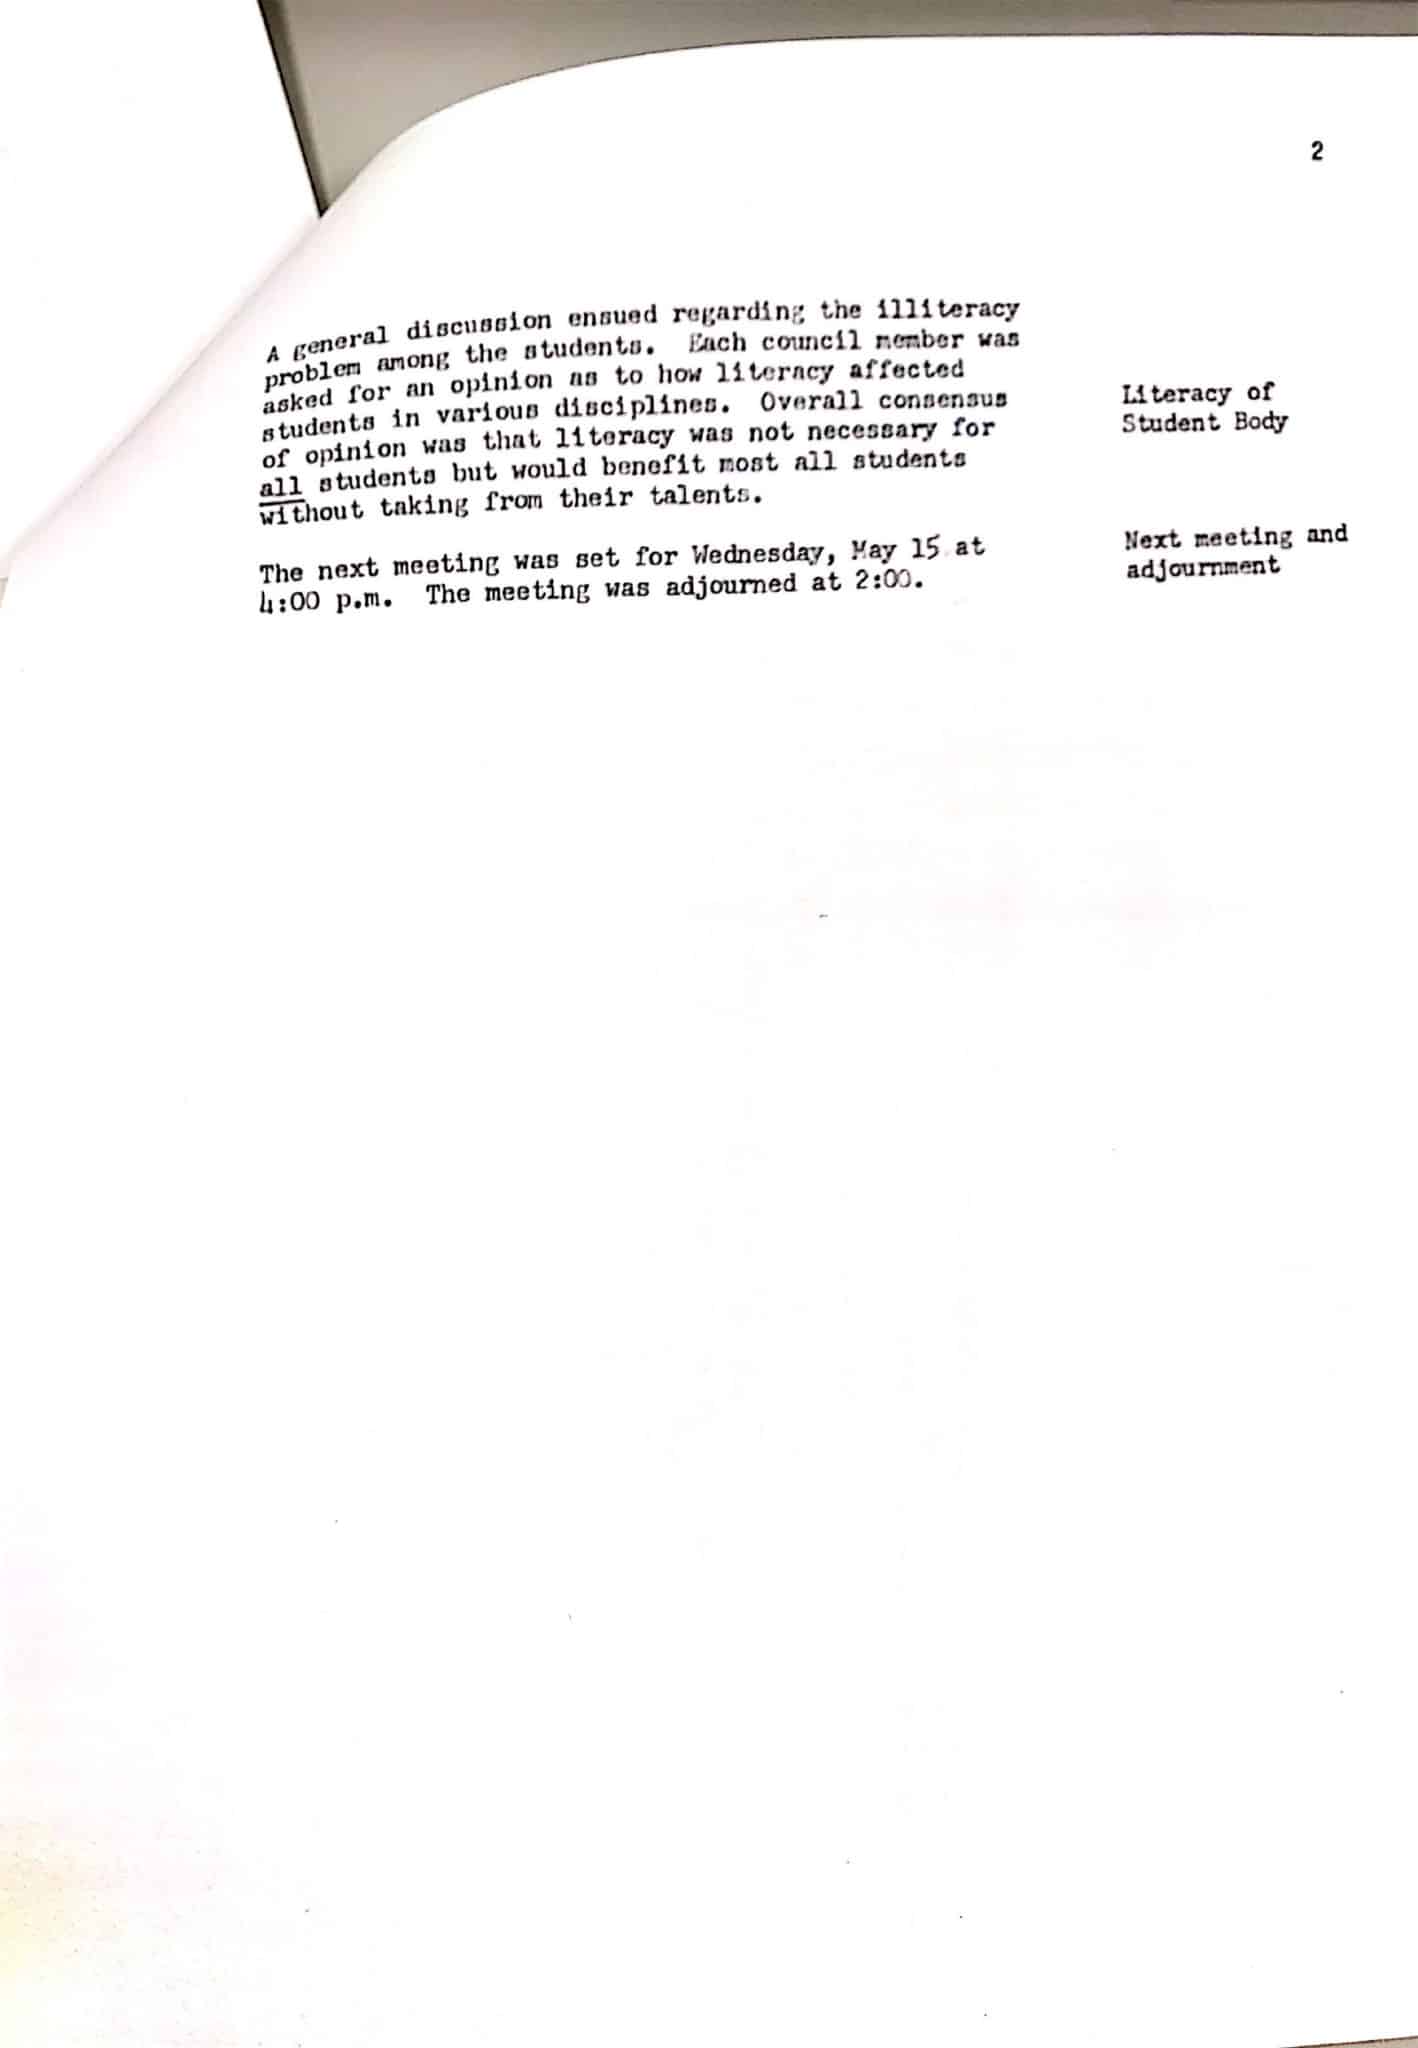 Text: "A general discussion ensued regarding the illiteracy problem among students. Each council member was asked for an opinion as to how literacy affected students in various disciplines. Overall consensus of opinion was that literacy was not necessary for all students but would benefit most all students without taking from their talents."